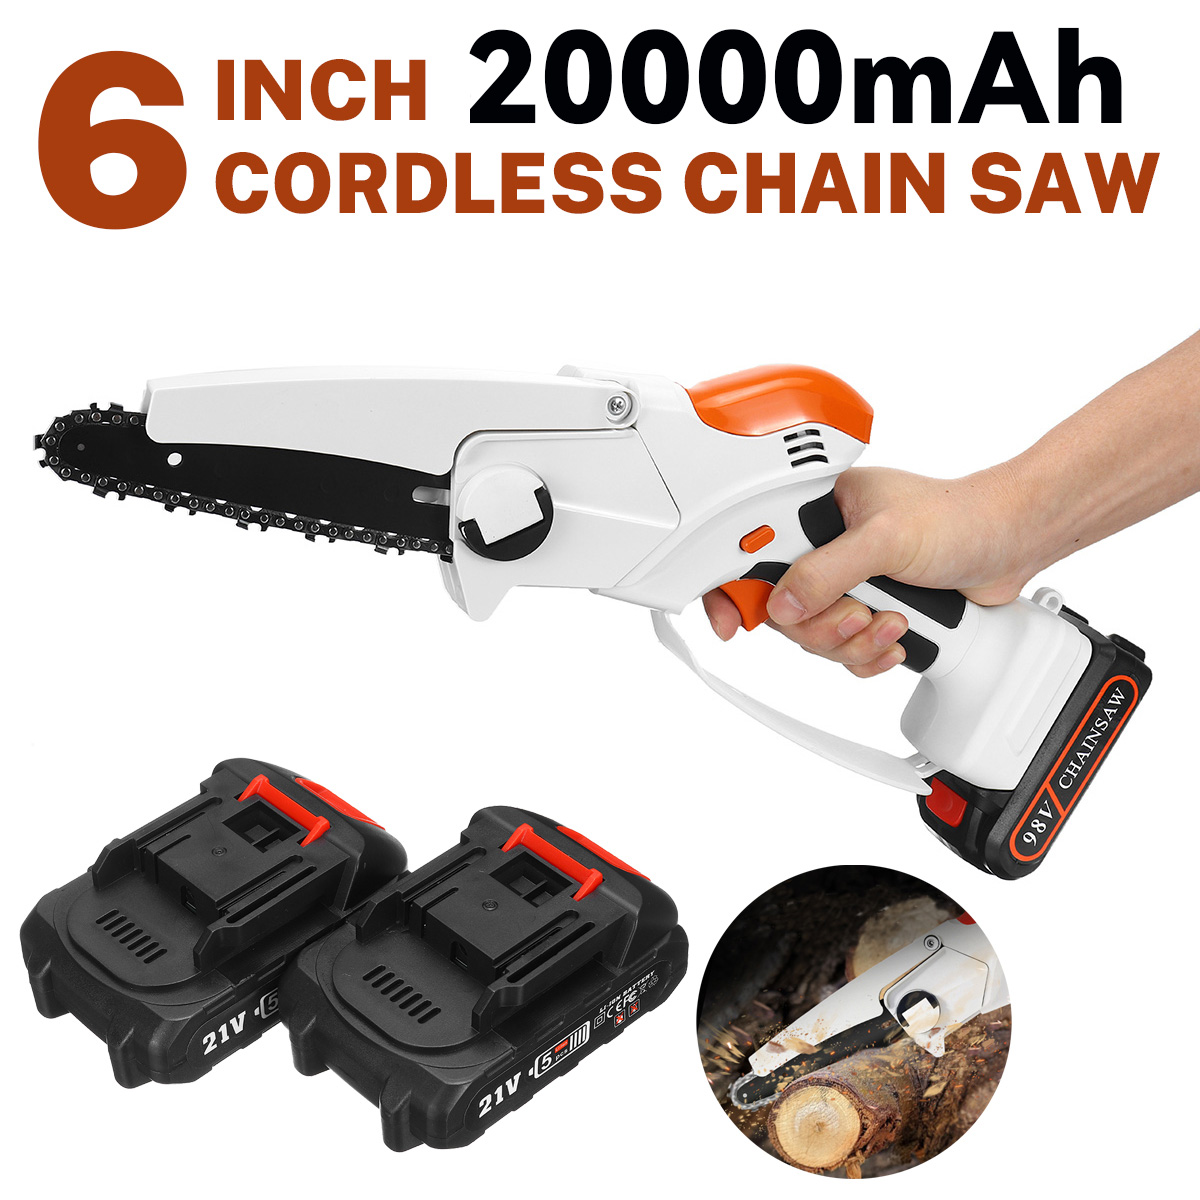 6-Inch-Portable-Electric-Chain-Saw-Mini-Cordless-Rechargeable-Woodworking-Wood-Cutting-Tool-W-12-Bat-1886164-2